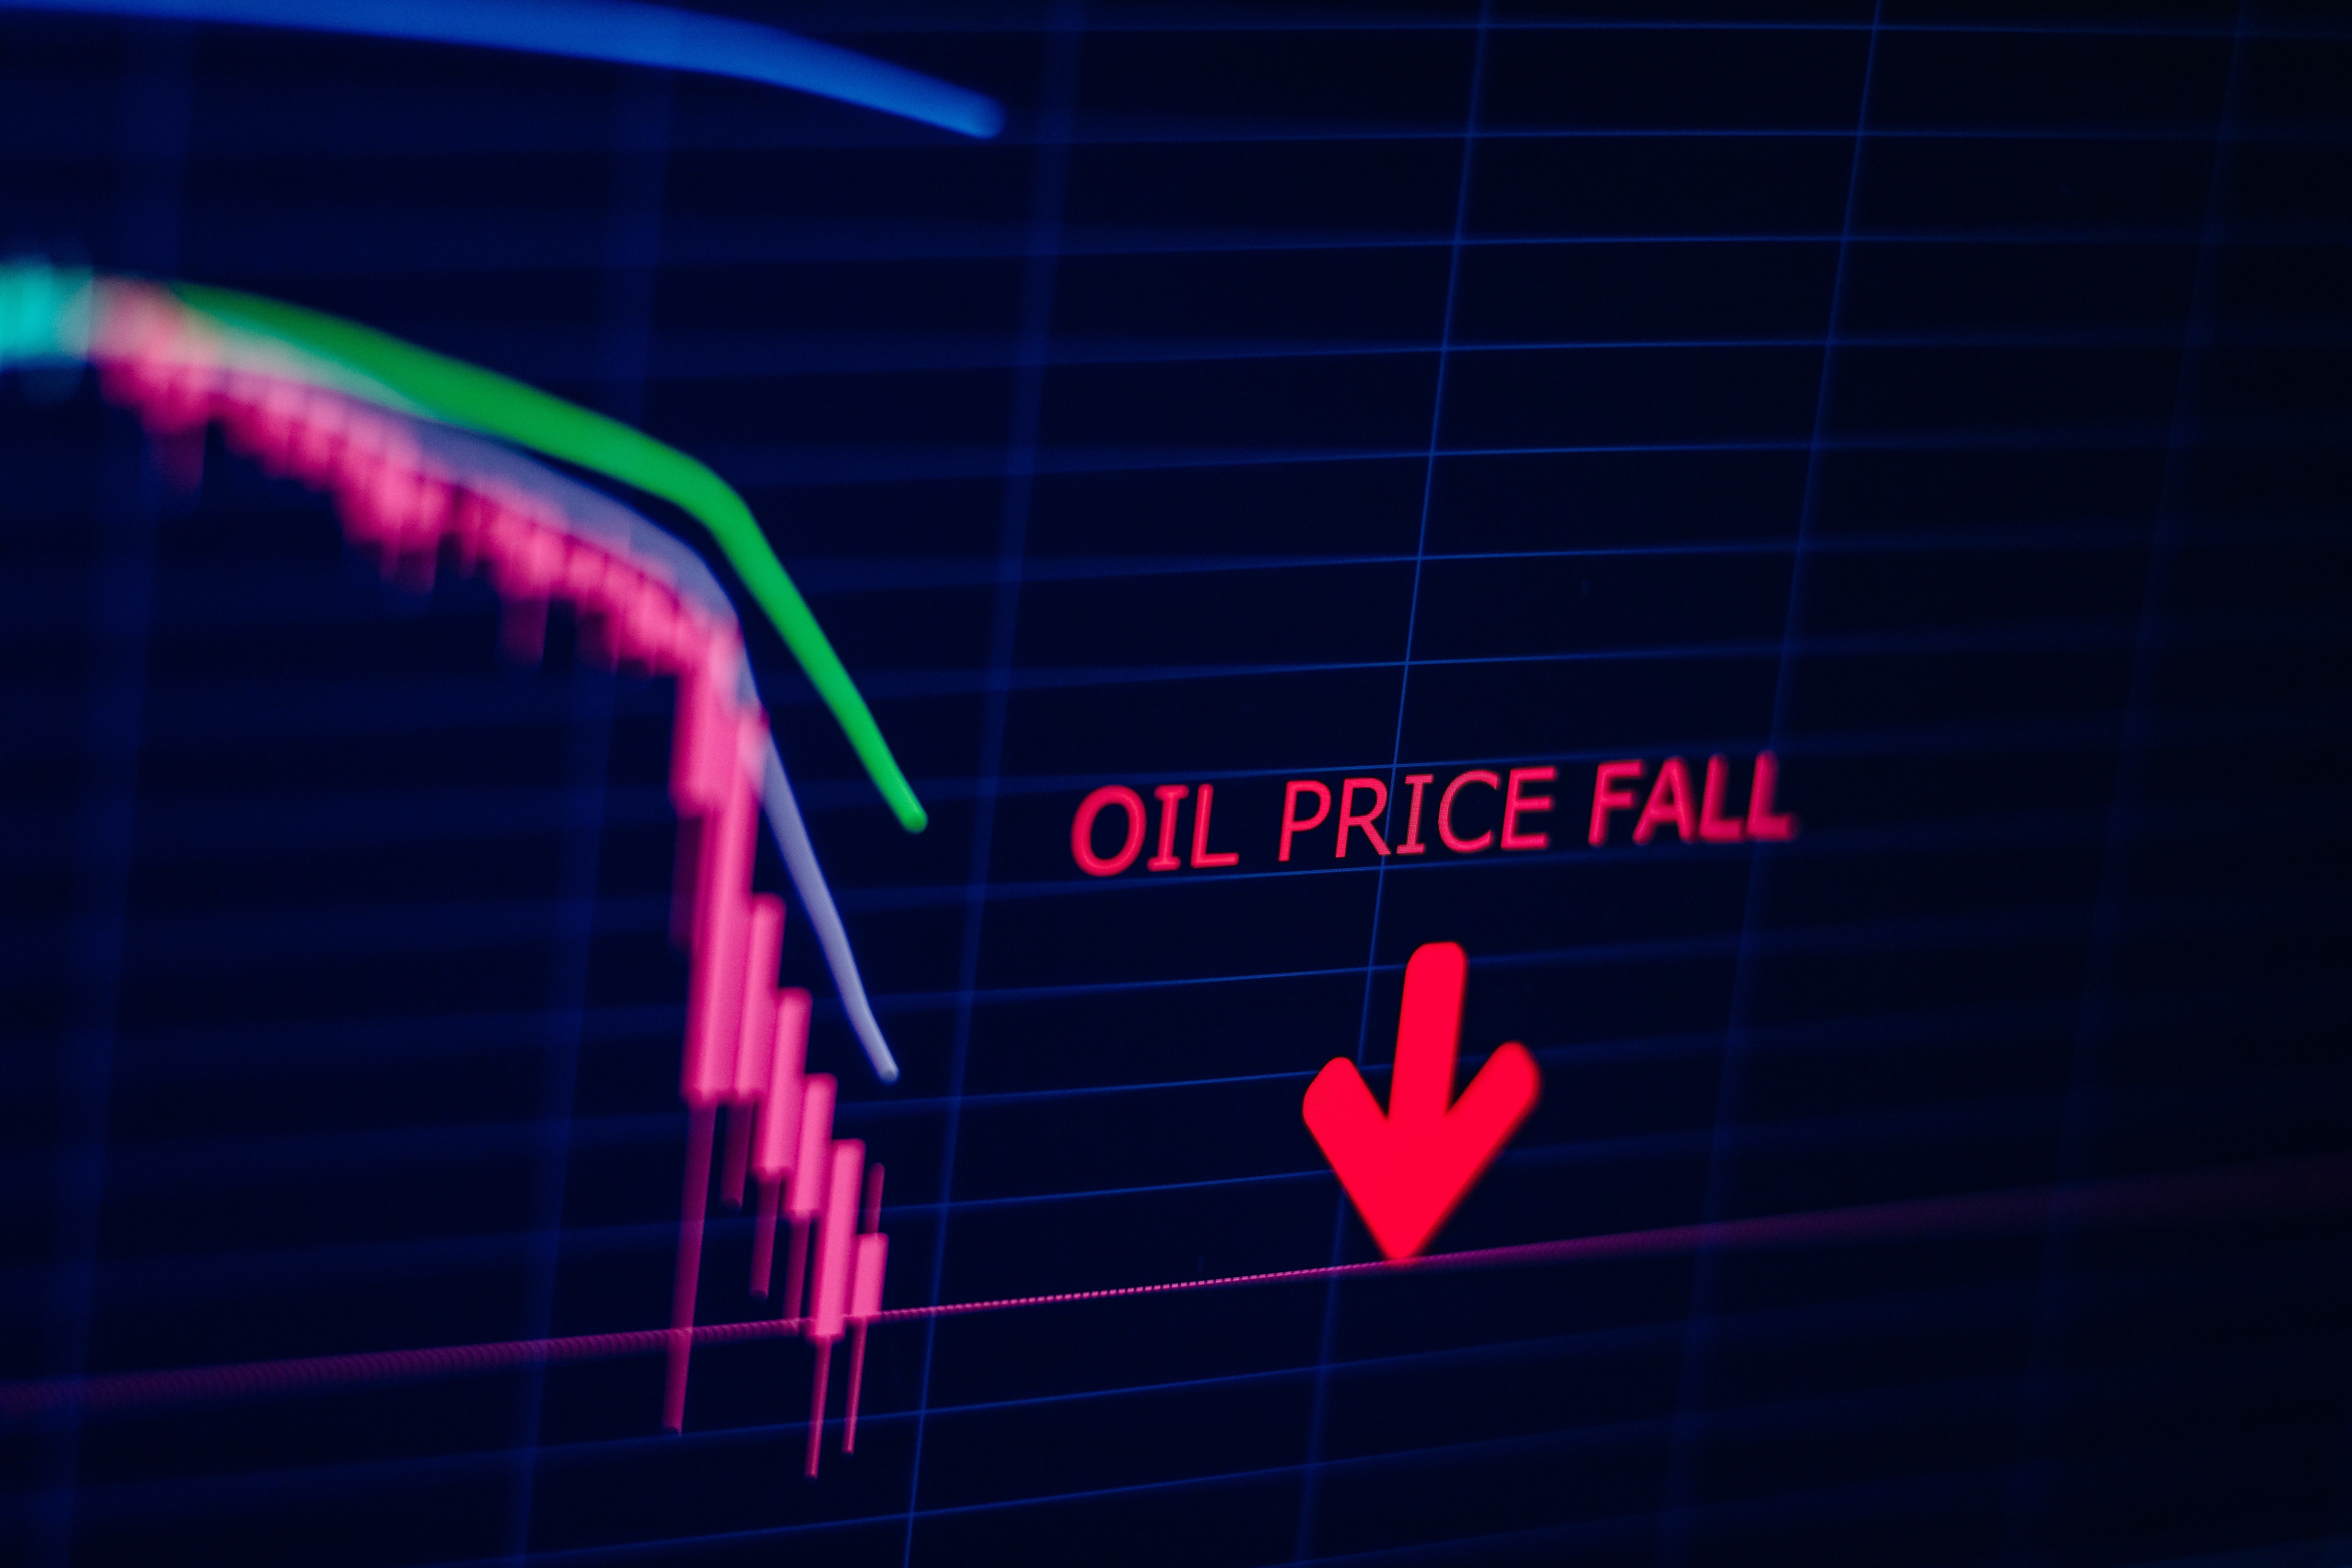 Oil barrel price falling down for economical crisis in stock mar